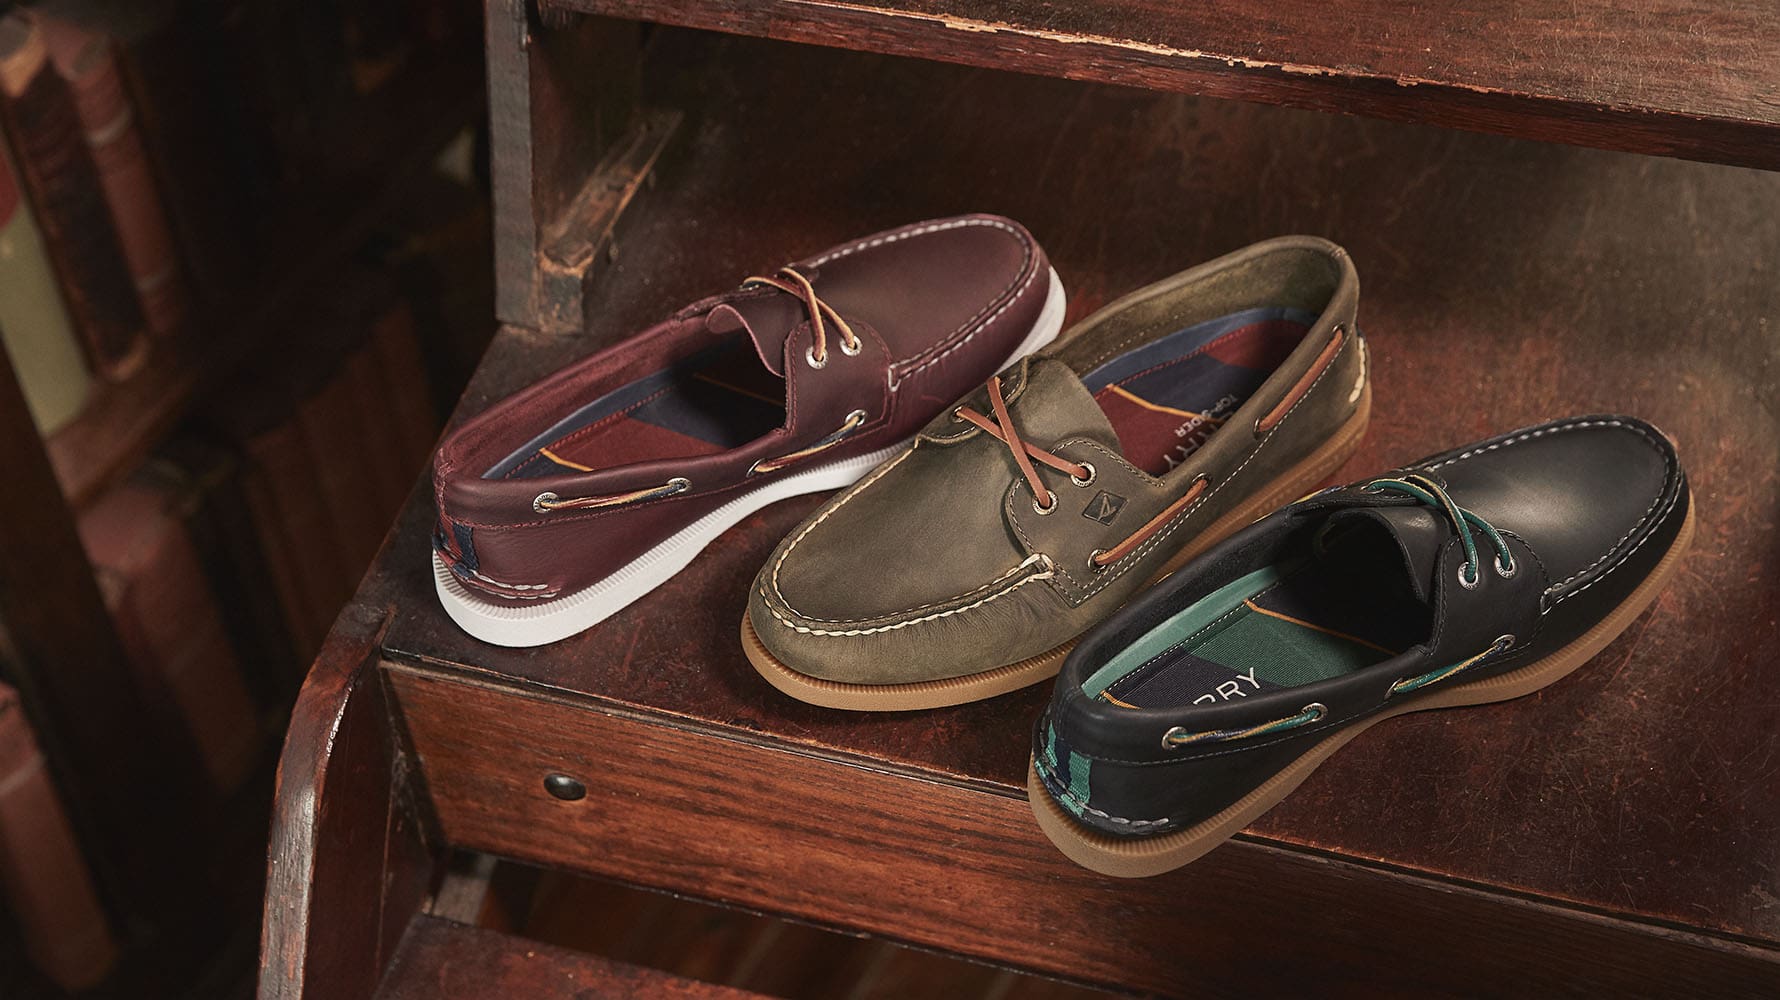 The Sperry Top-Sider Was Inspired by 